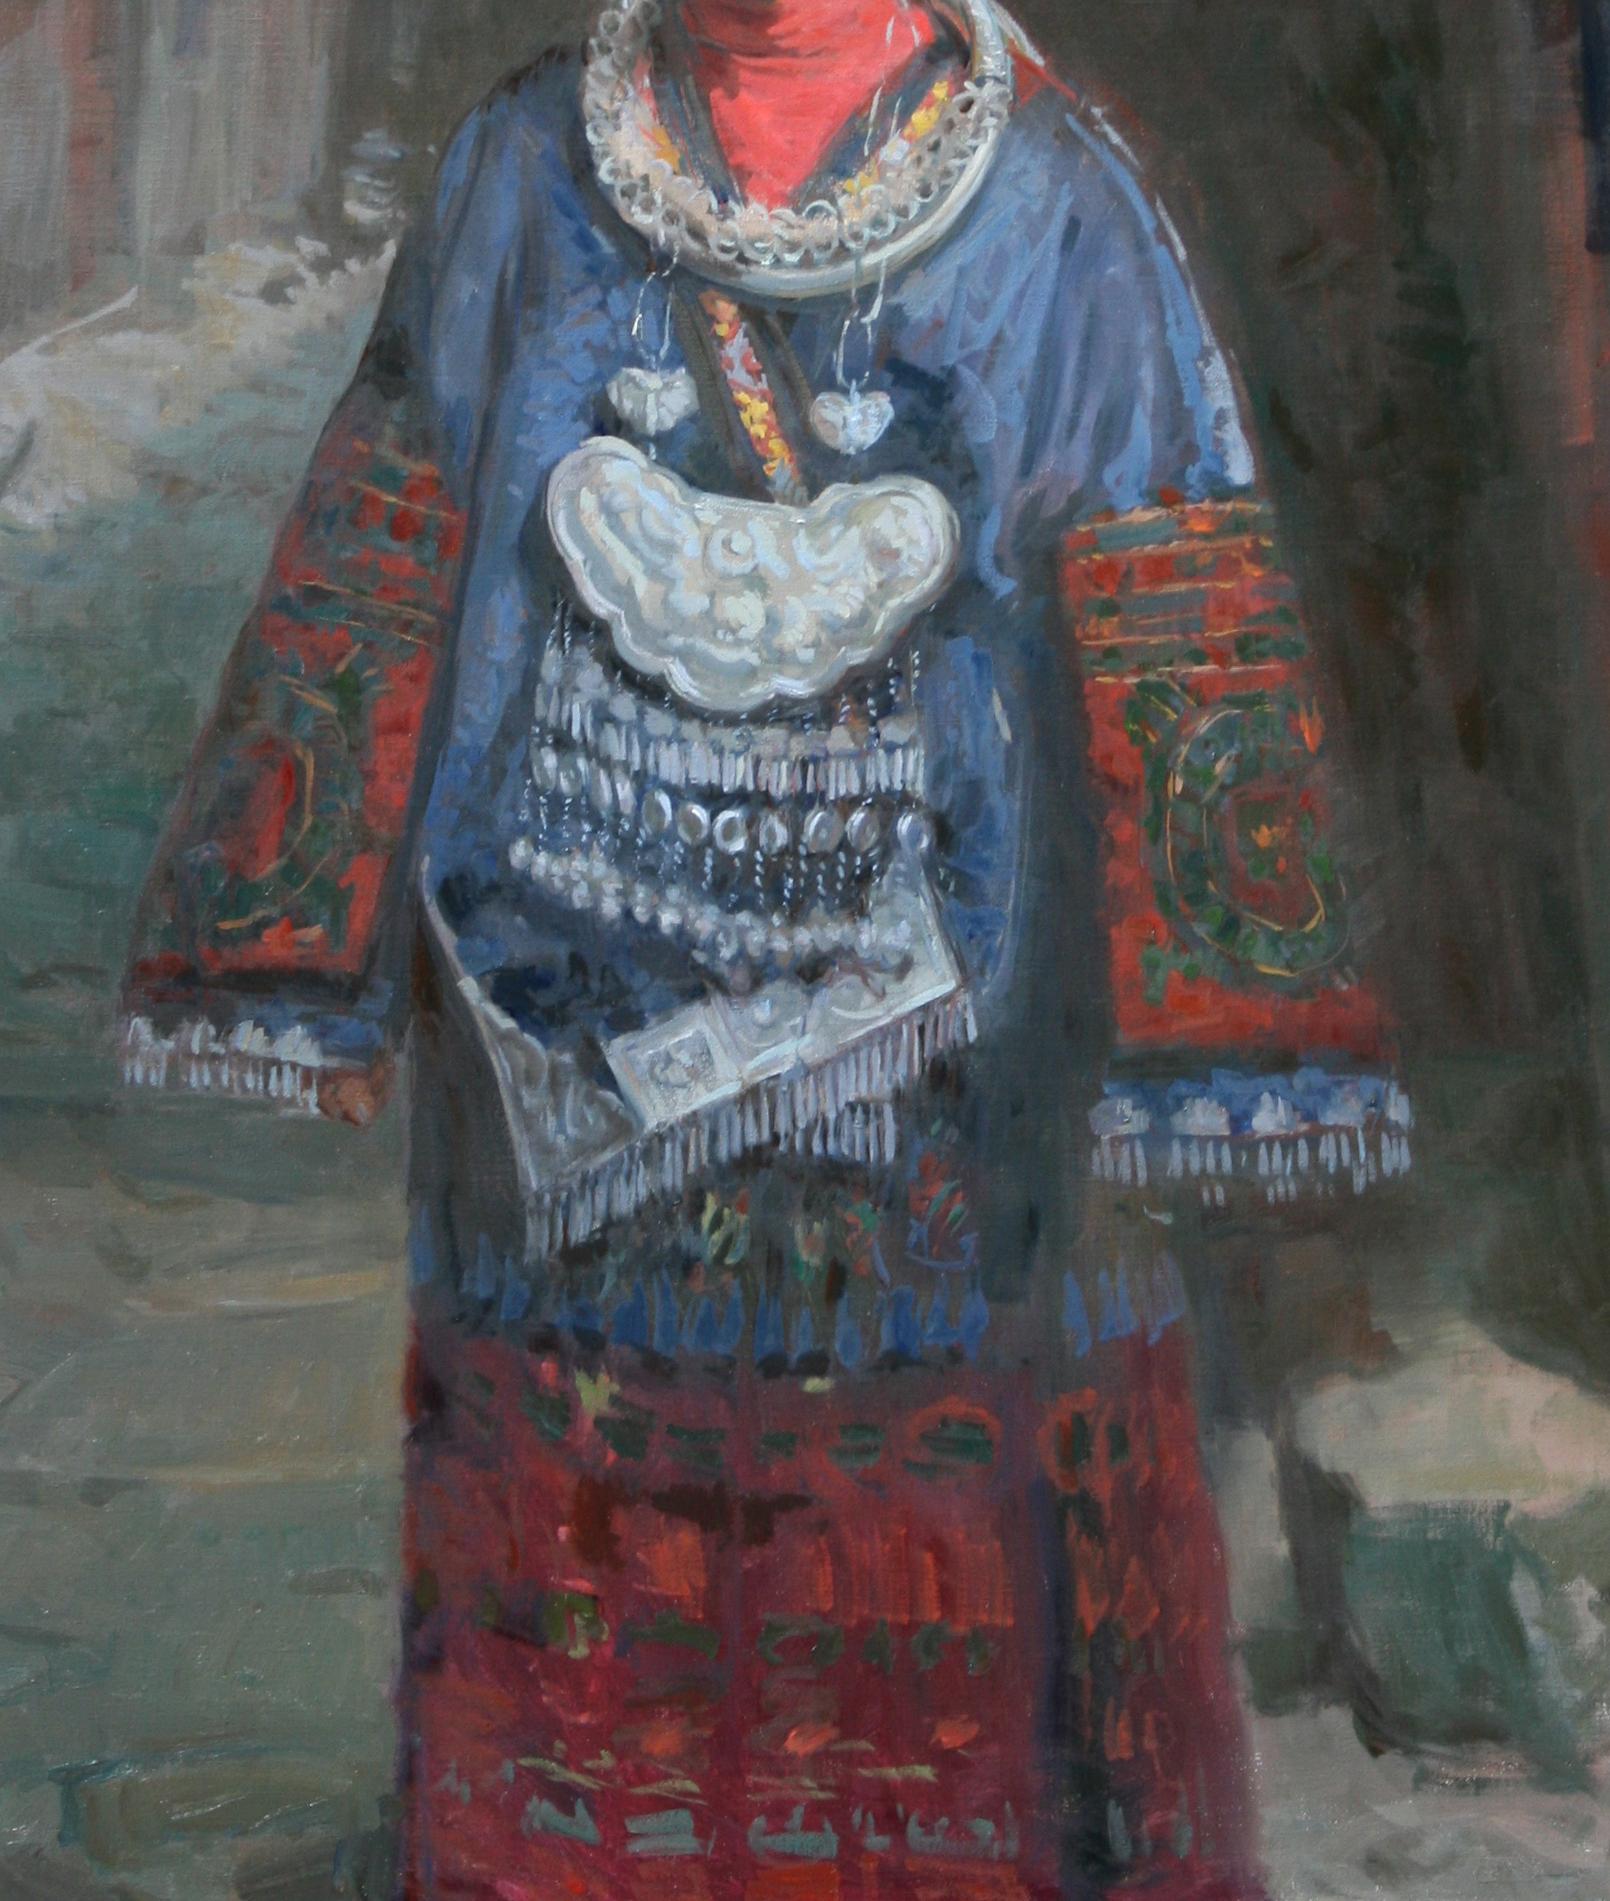  Miao Girl, South China Mountains, Ethnic, Oil Painting , Figurative  - Gray Figurative Painting by William  Kalwick  